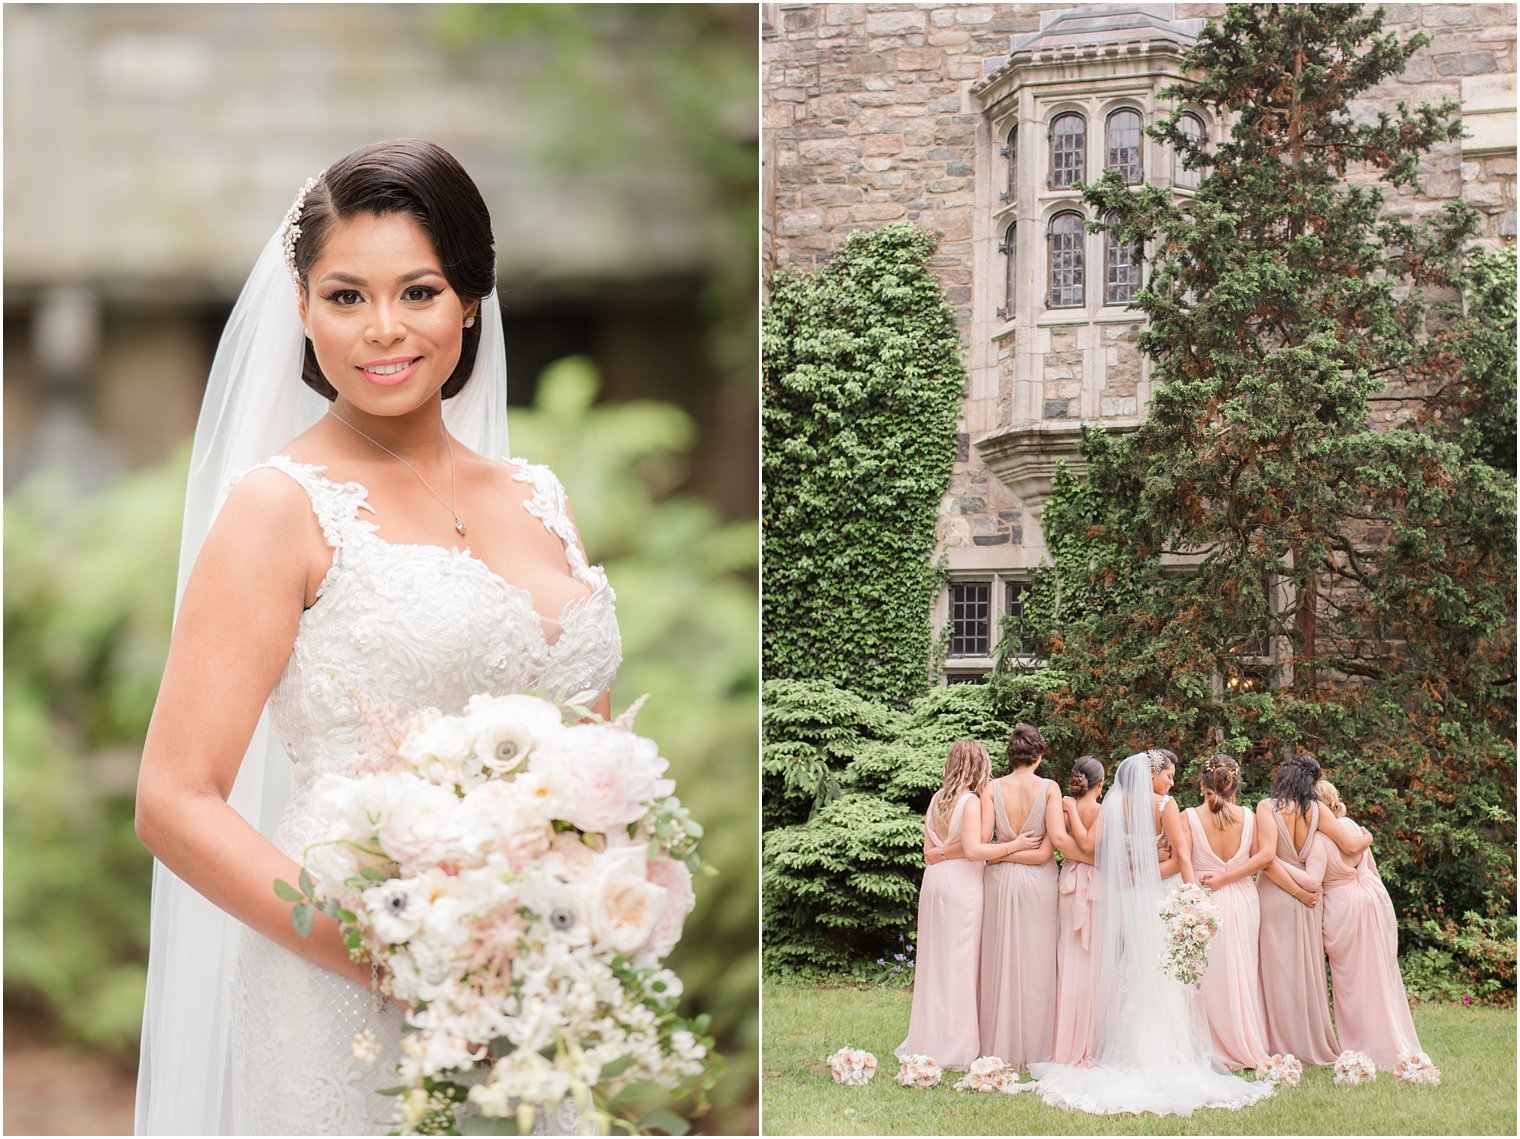 formal portraits during wedding day | The Castle at Skylands Manor Wedding Photos by Idalia Photography